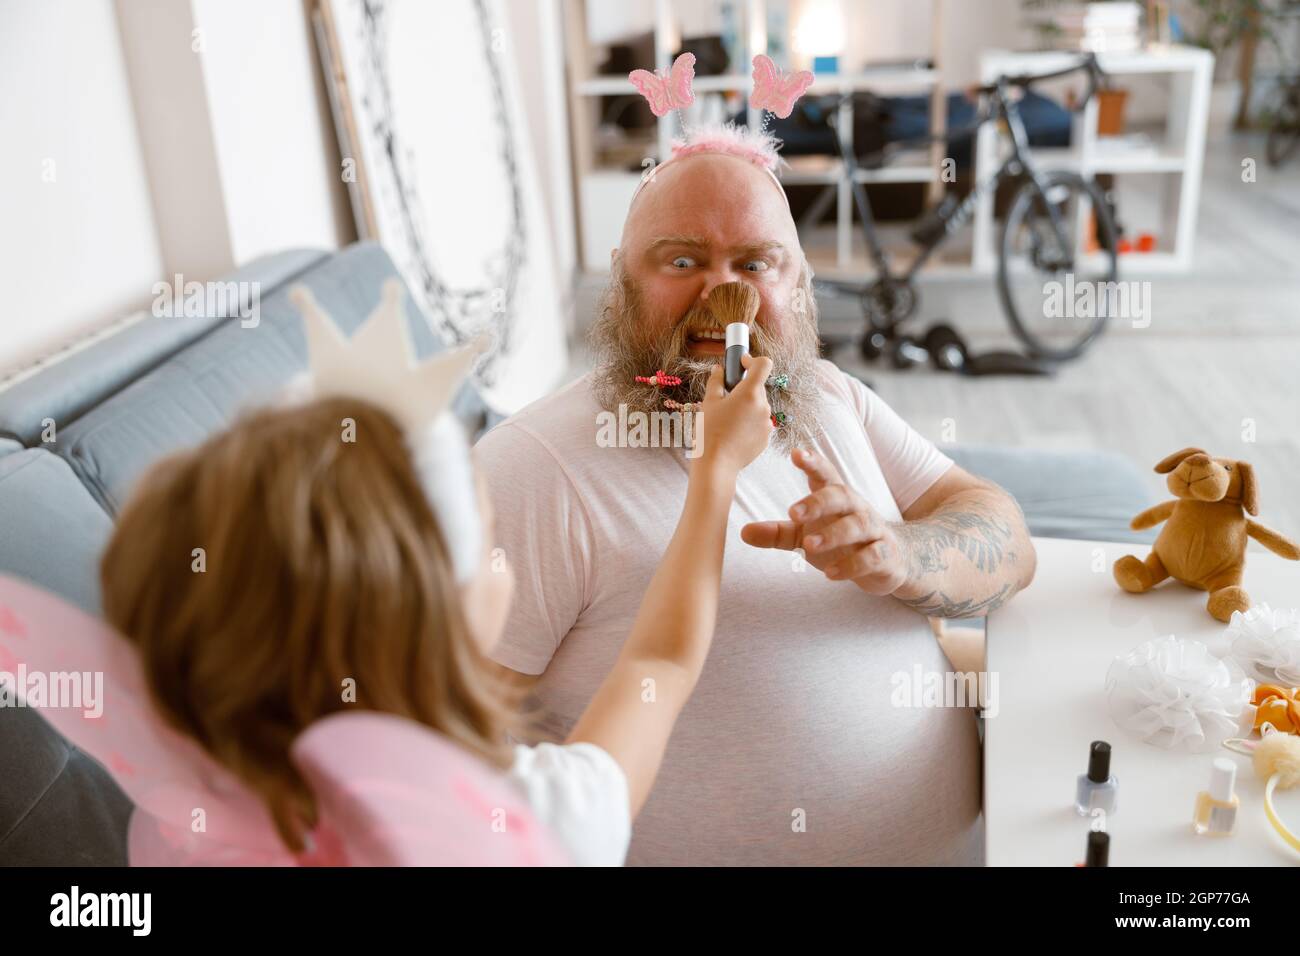 Daughter with princess crown applies powder onto nose of shocked father in living room Stock Photo